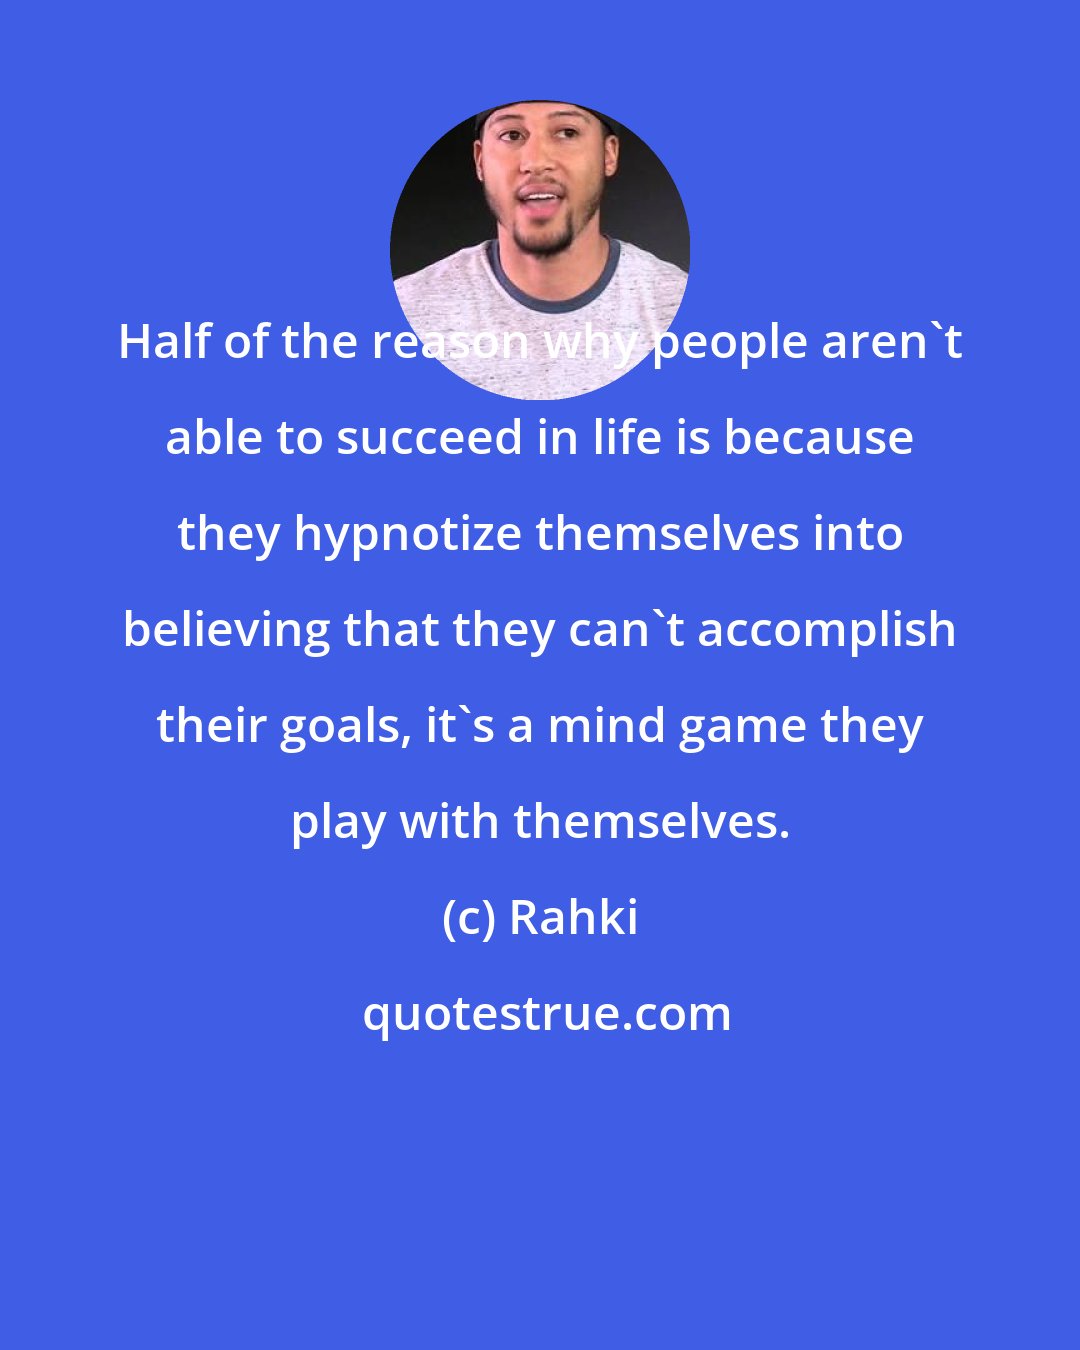 Rahki: Half of the reason why people aren't able to succeed in life is because they hypnotize themselves into believing that they can't accomplish their goals, it's a mind game they play with themselves.